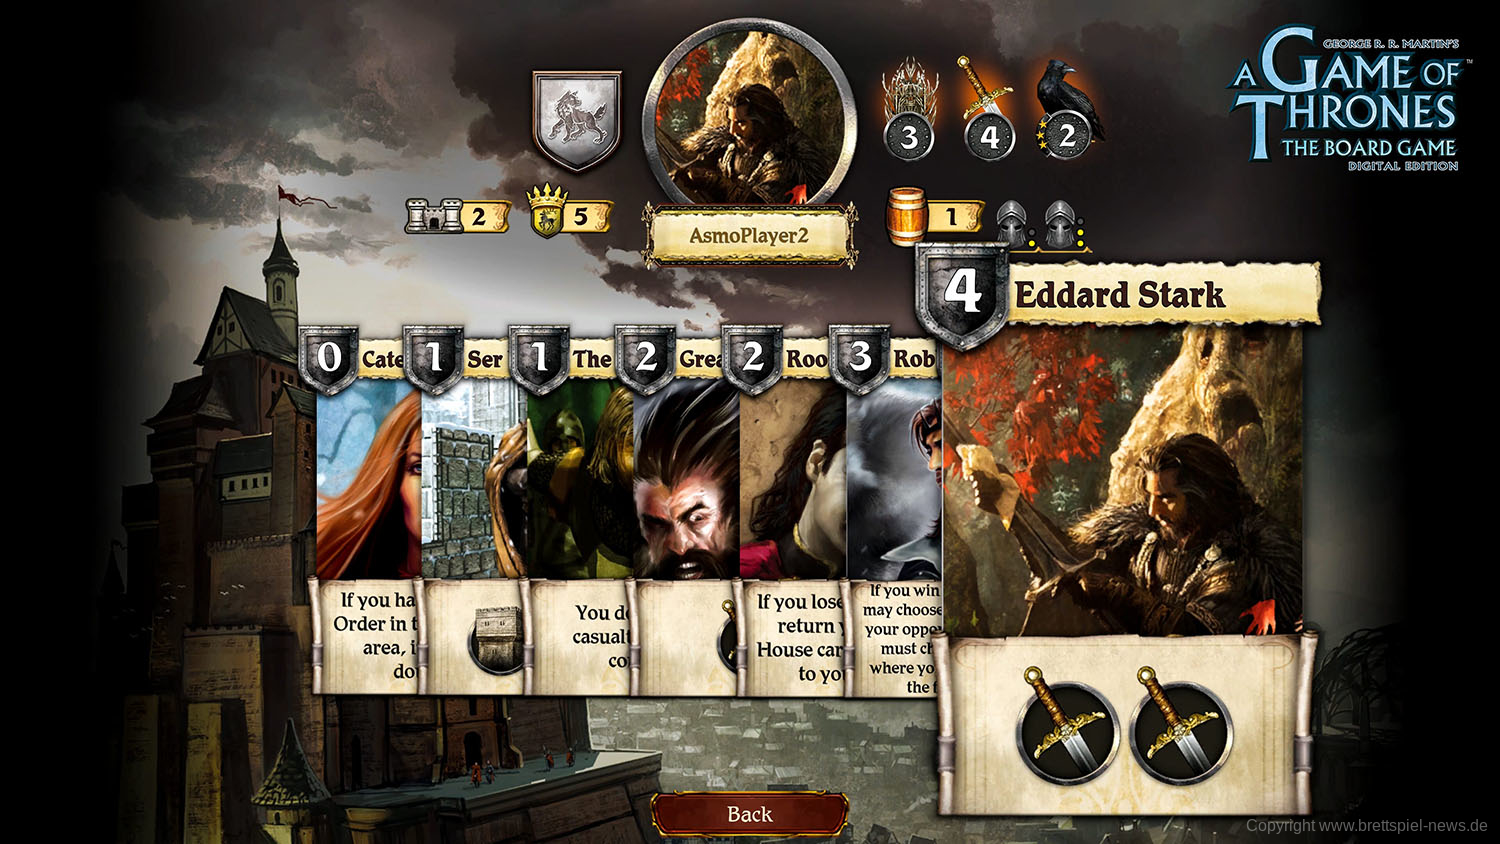 A Game of Thrones The Board Game Digital Edition Screenshot 6